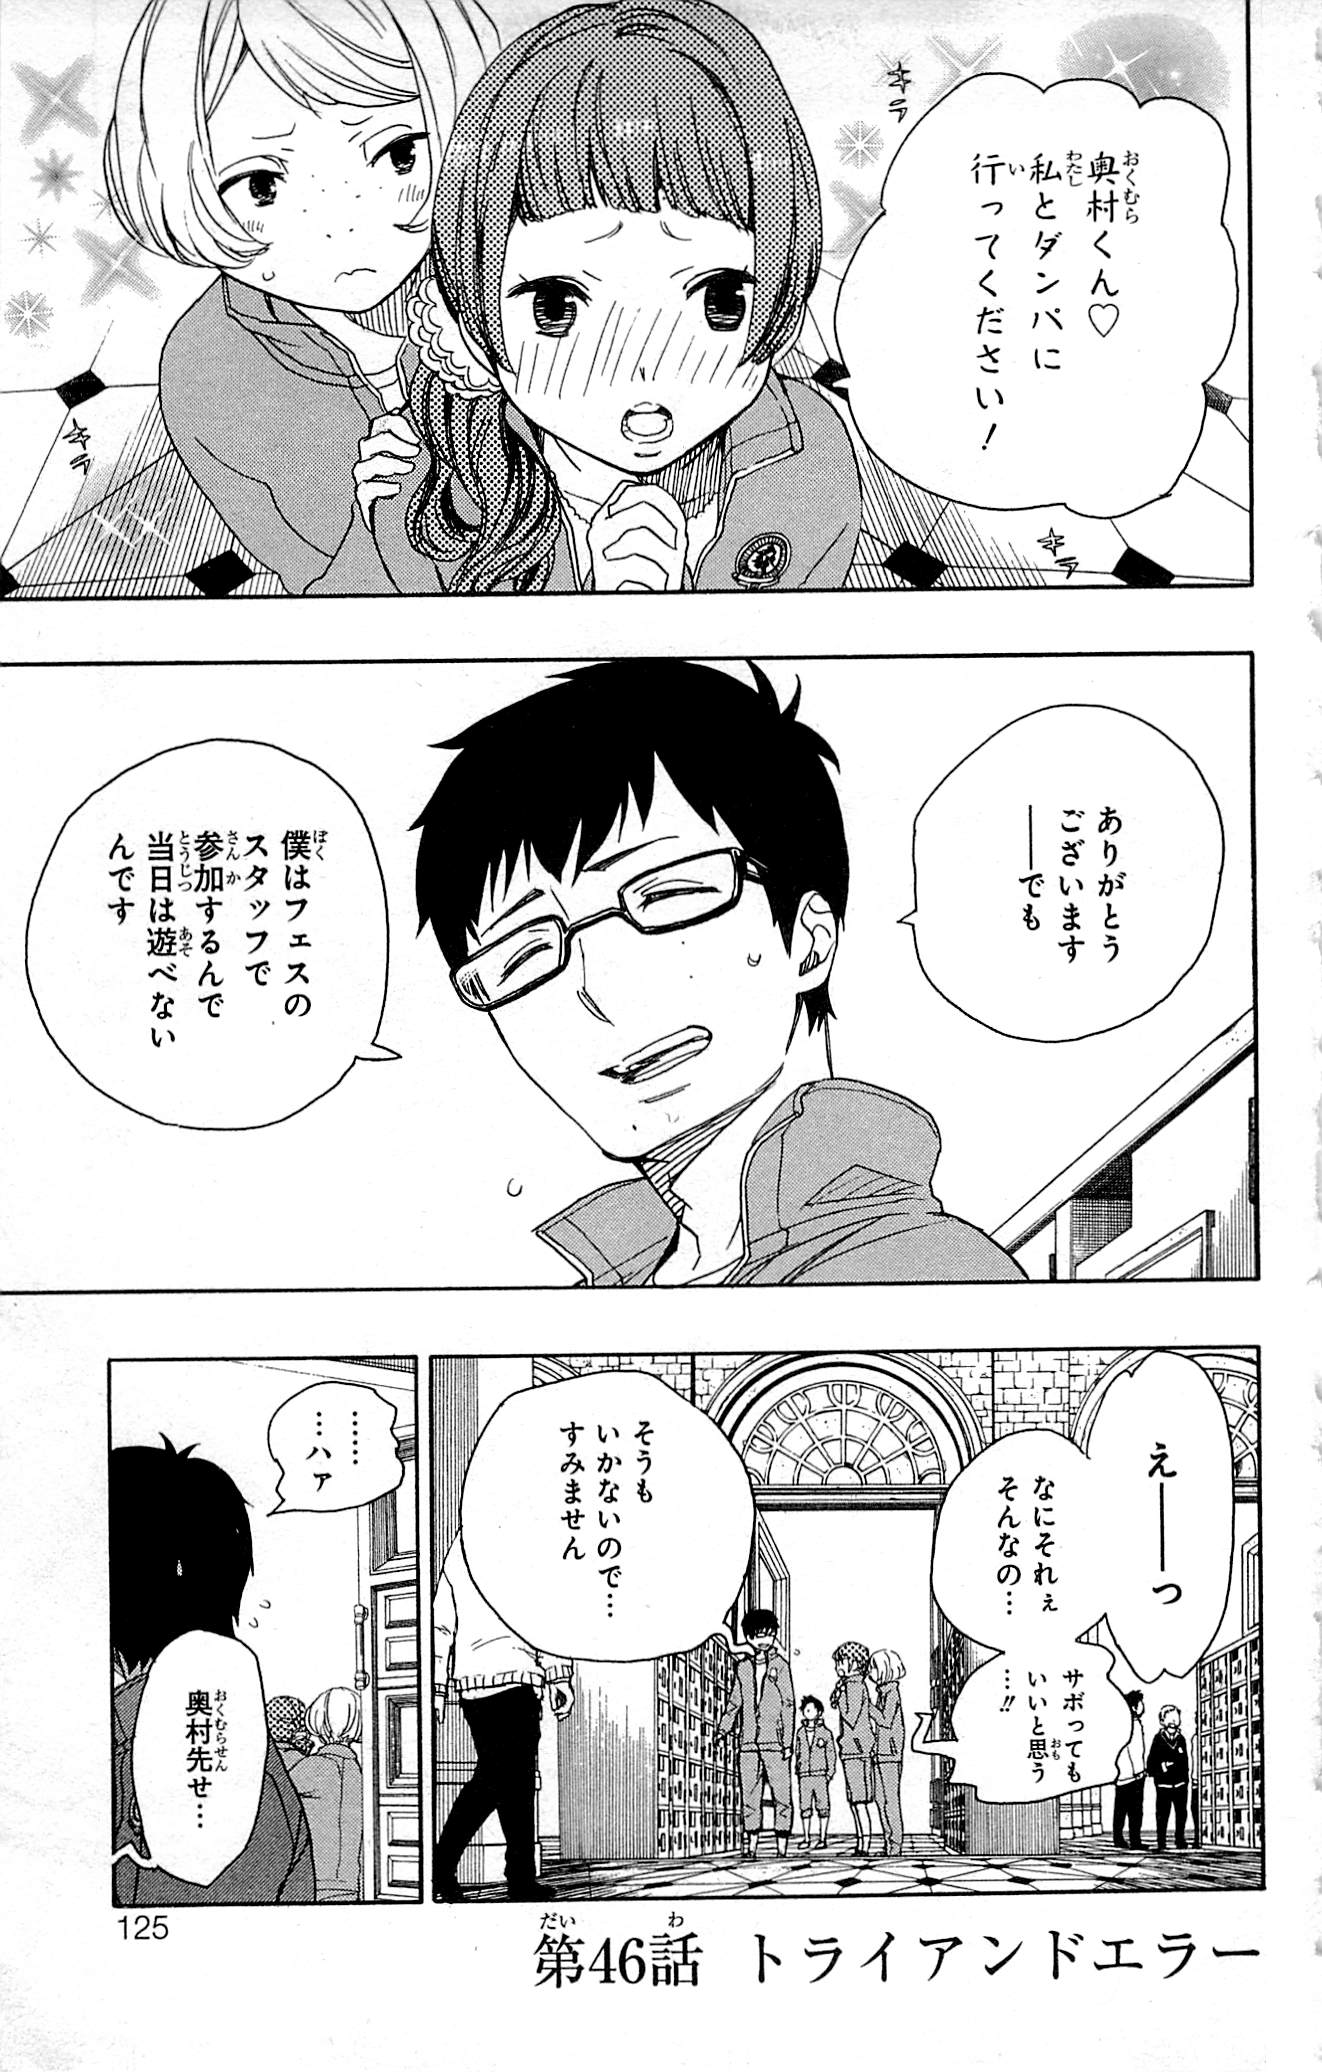 Ao no Exorcist - Chapter 46 - Page 1